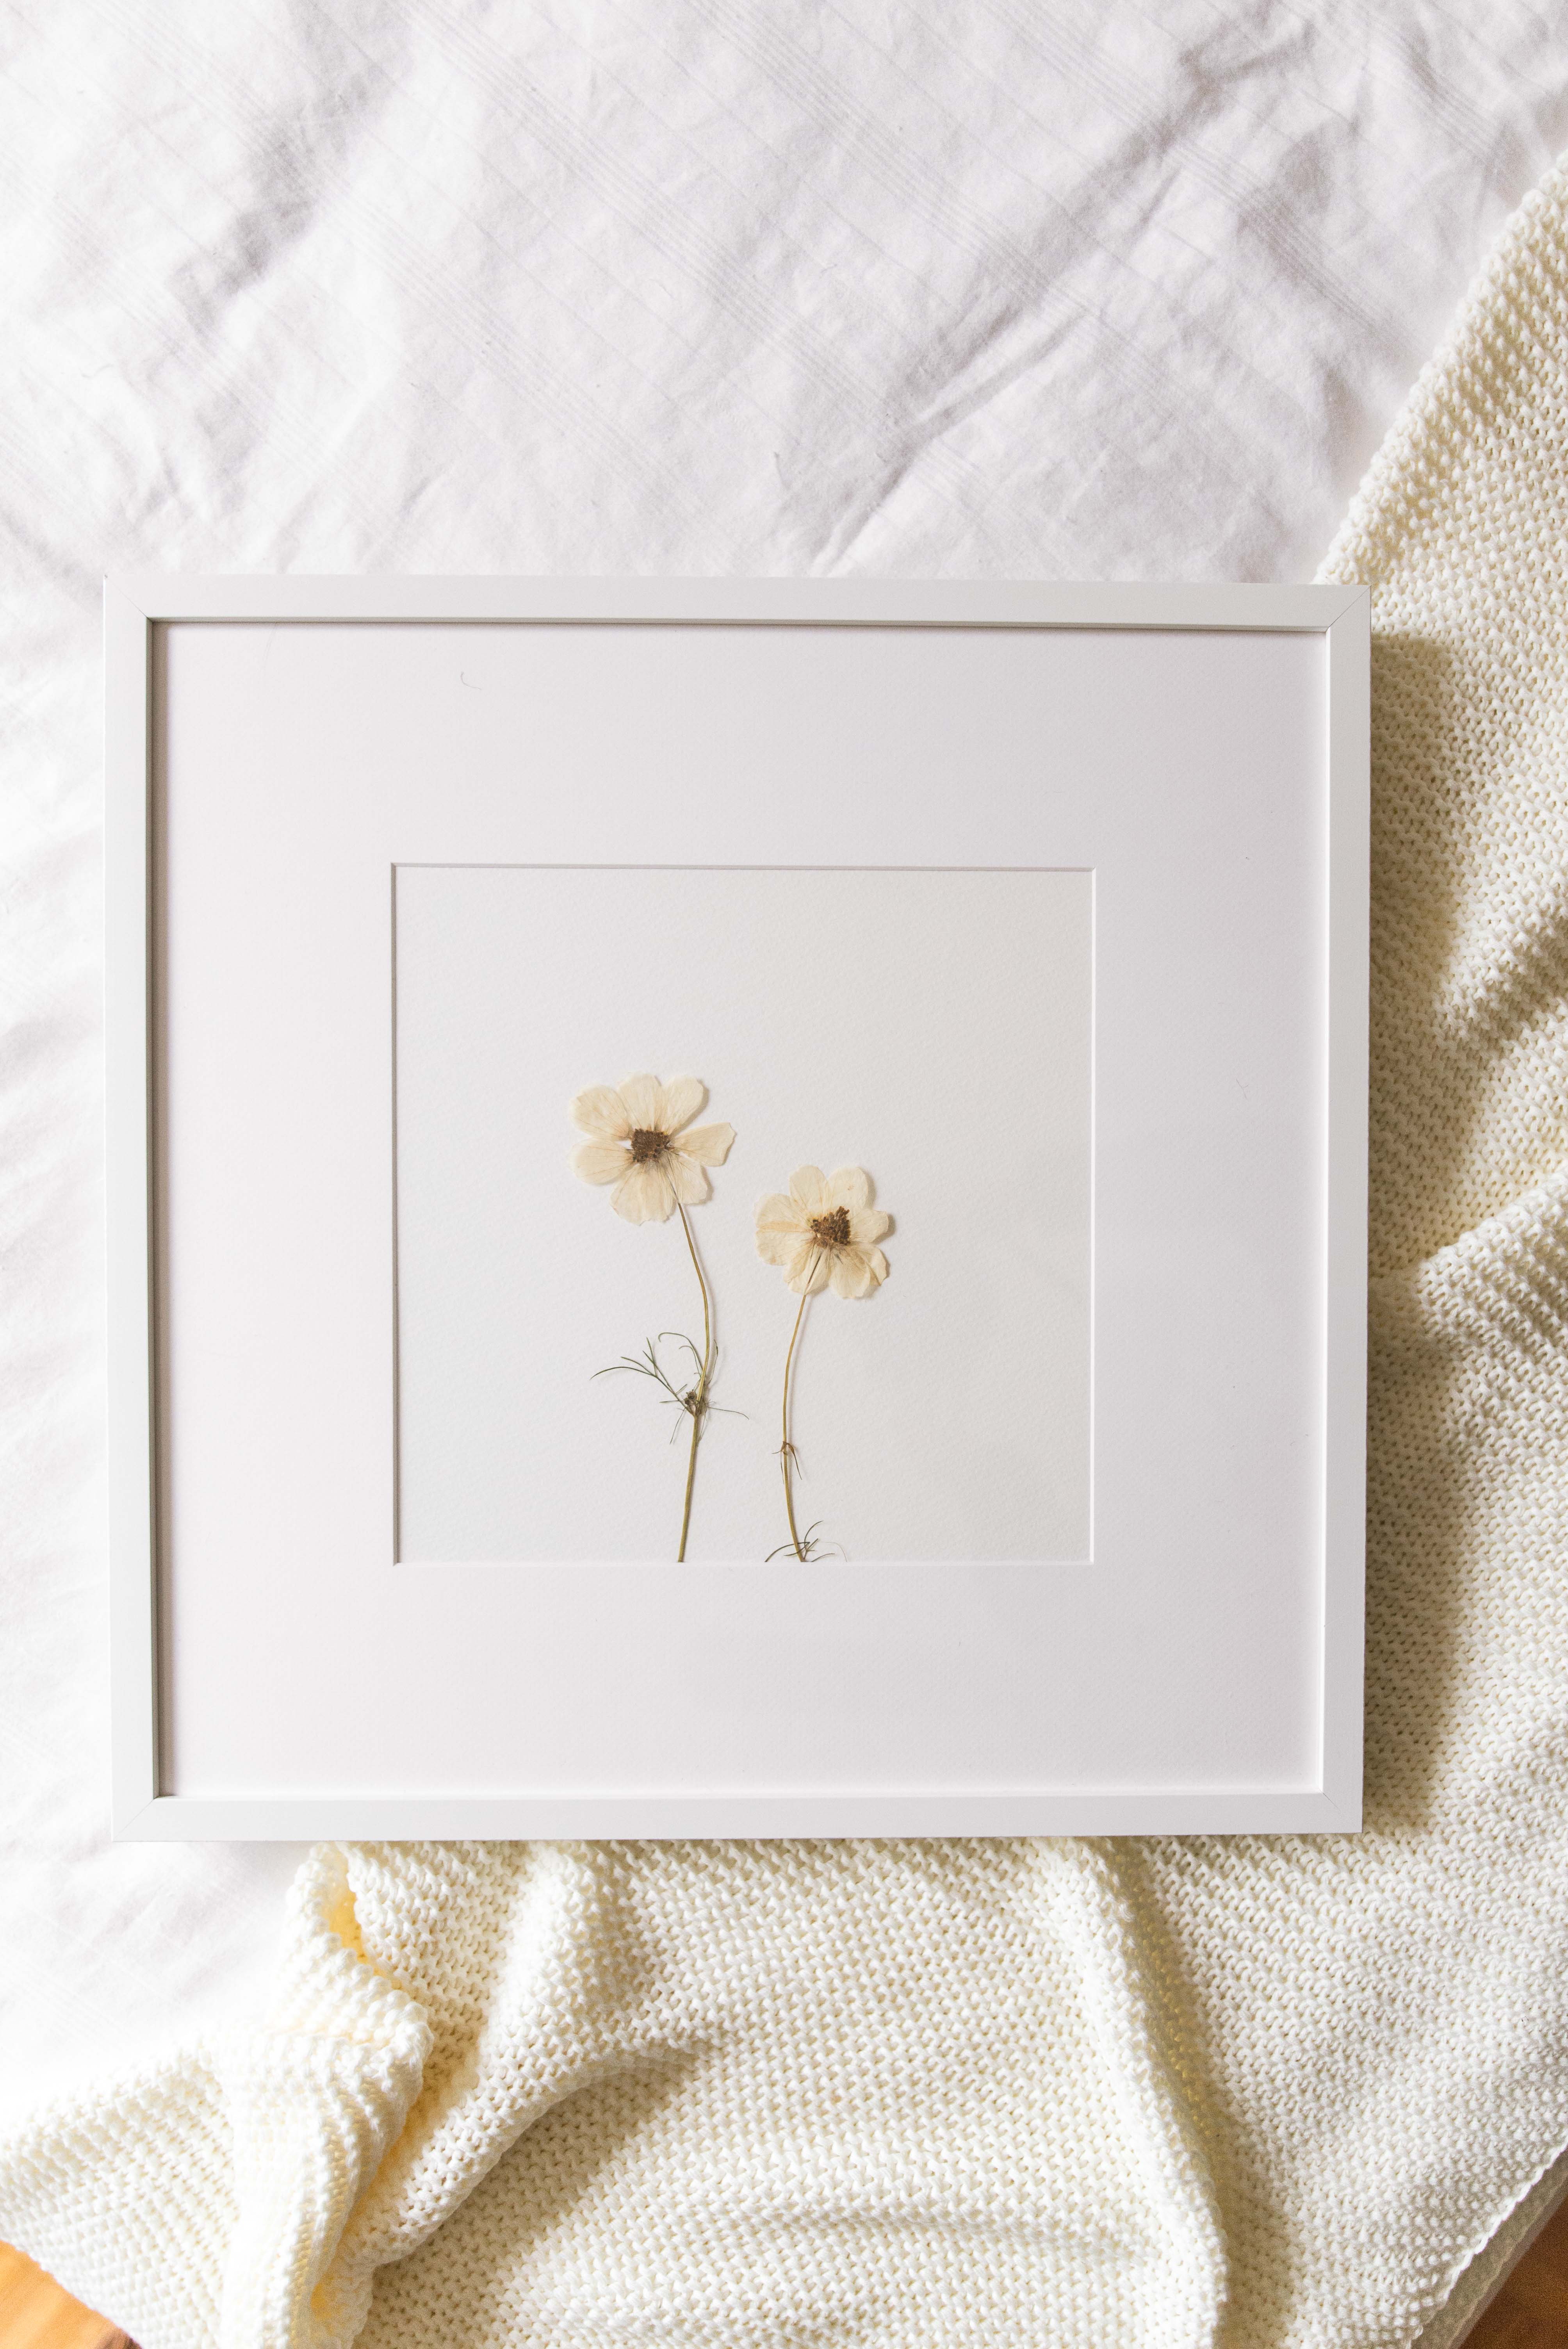 Pressed Flowers - How to Make a Flower Press and Display Pressed Flowers